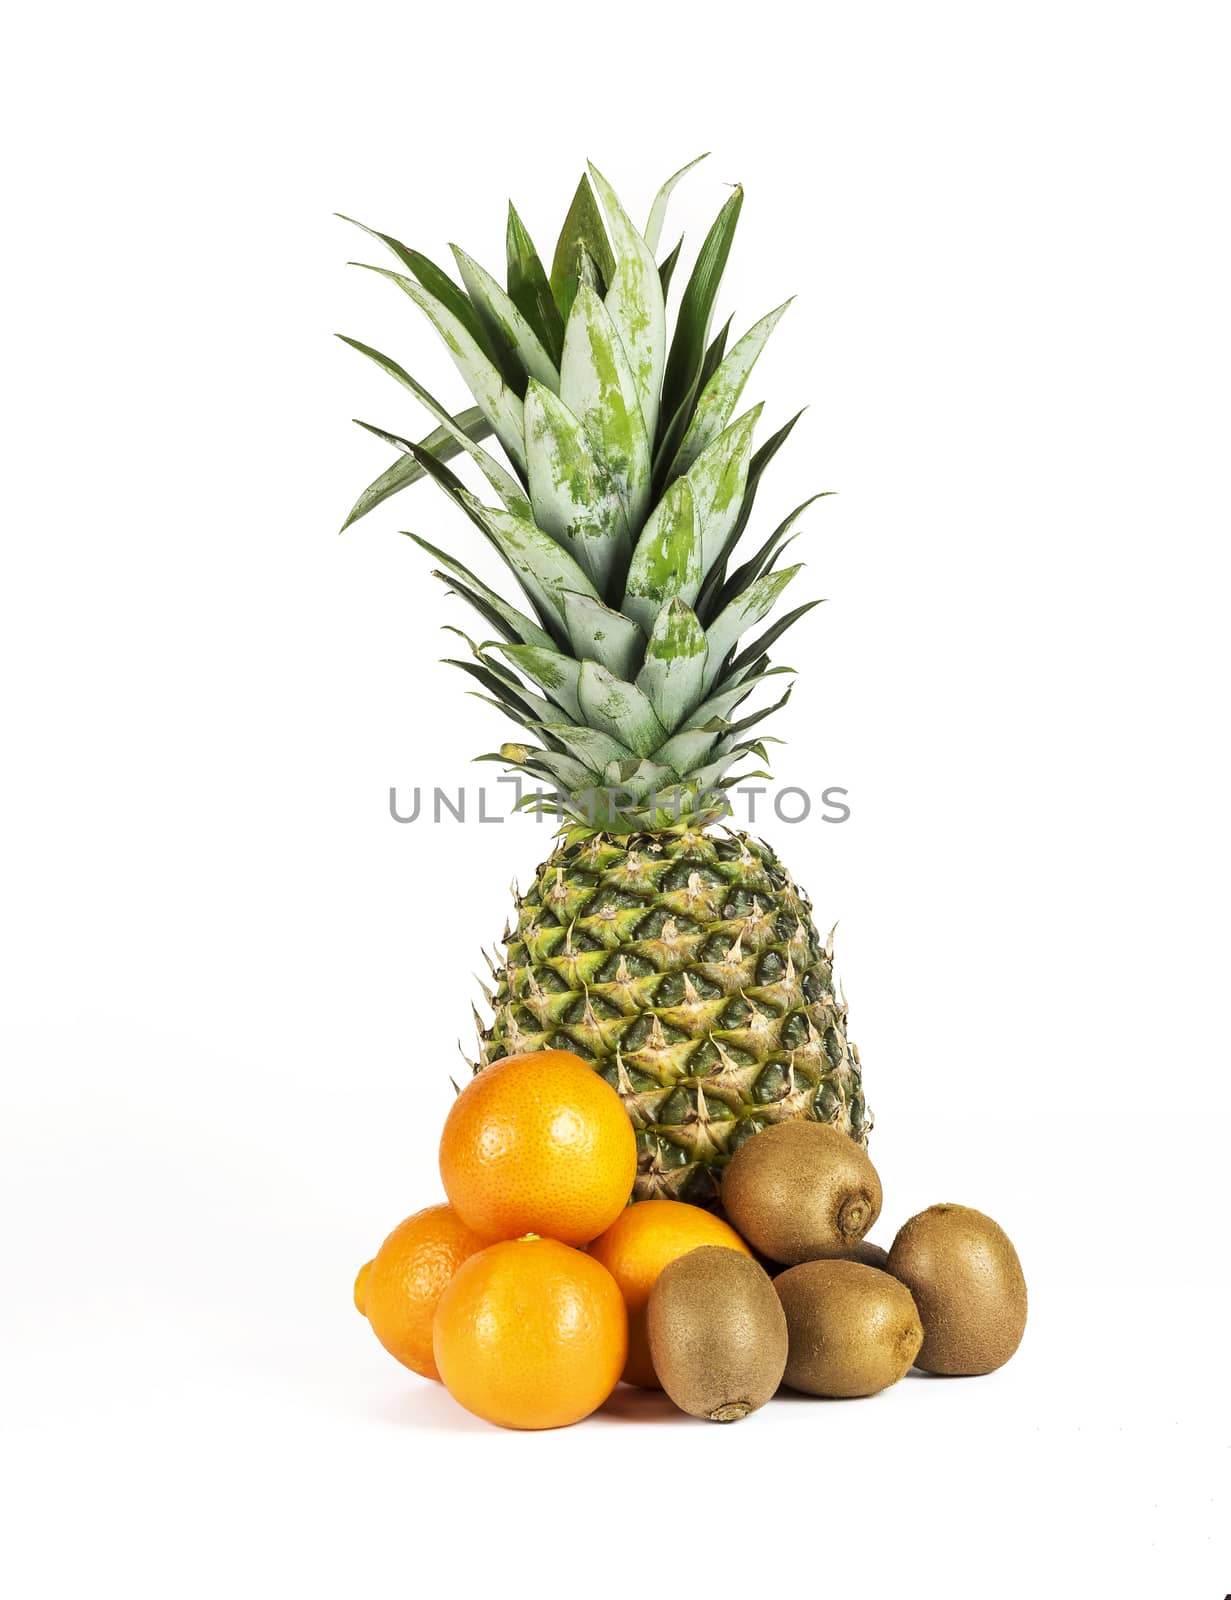 On a white background there is a large ripe pineapple and a number of mandarins and kiwis lie nearby